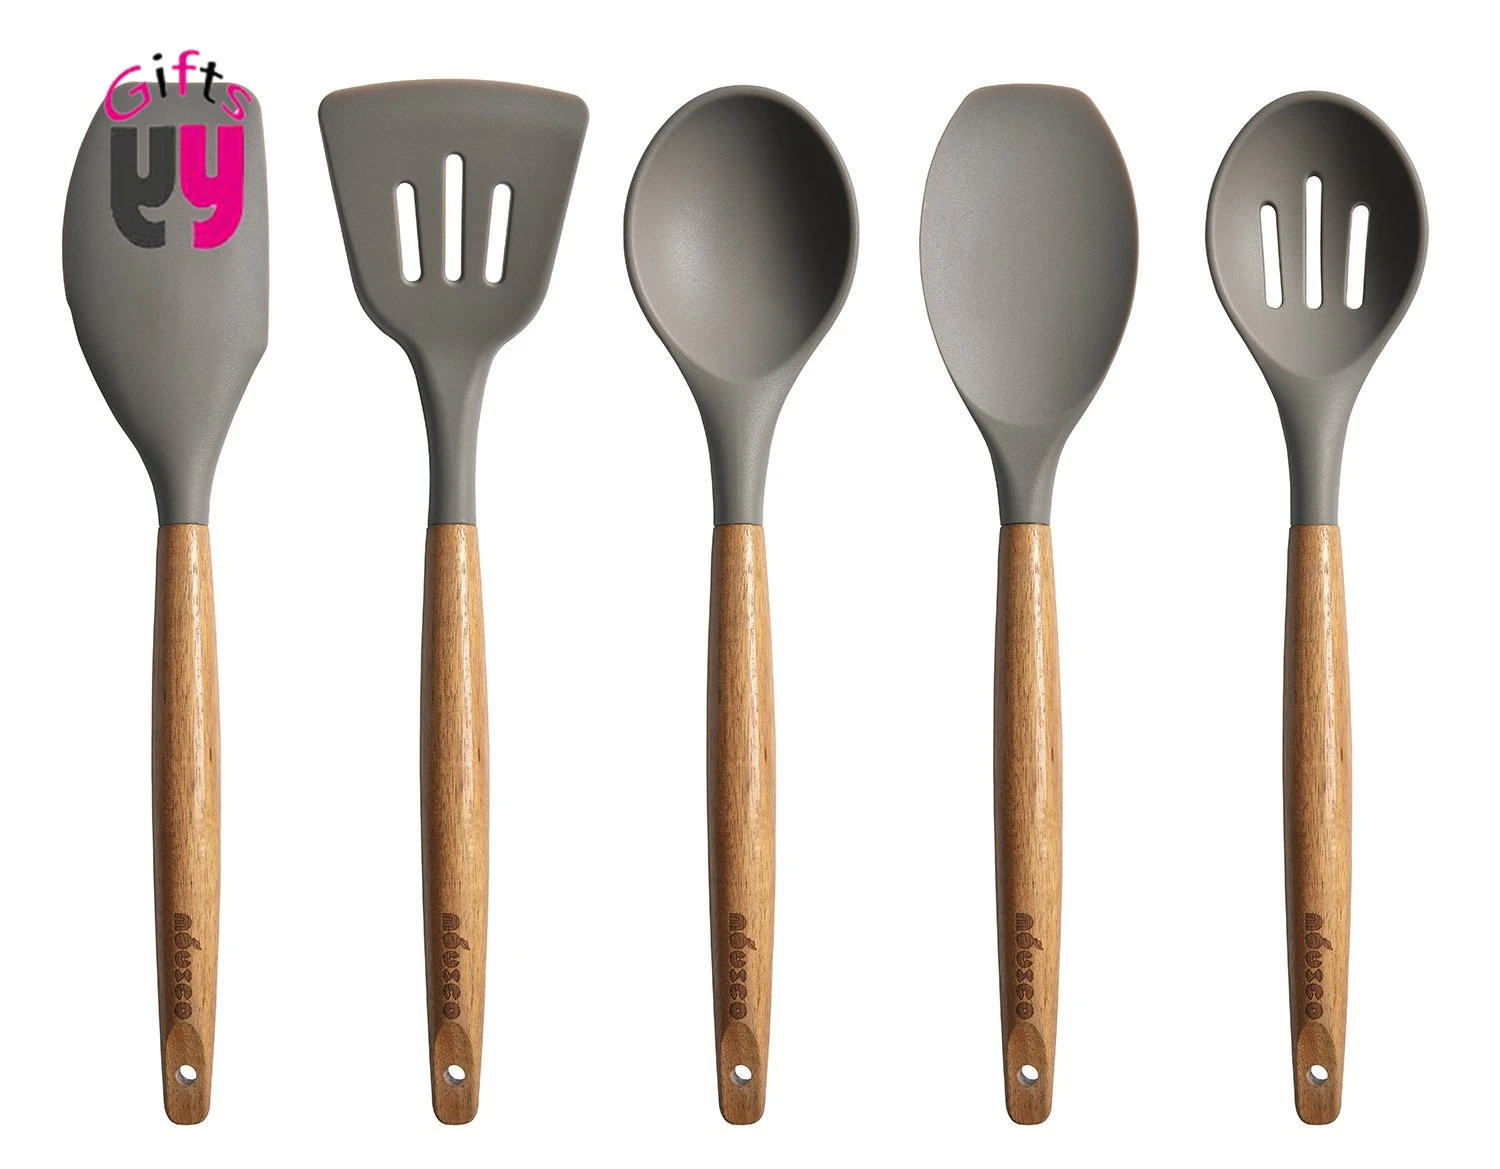 9 pieces Non-stick Wooden handle silicone kitchen accessories, silicone kitchen utensils, cooking tools set